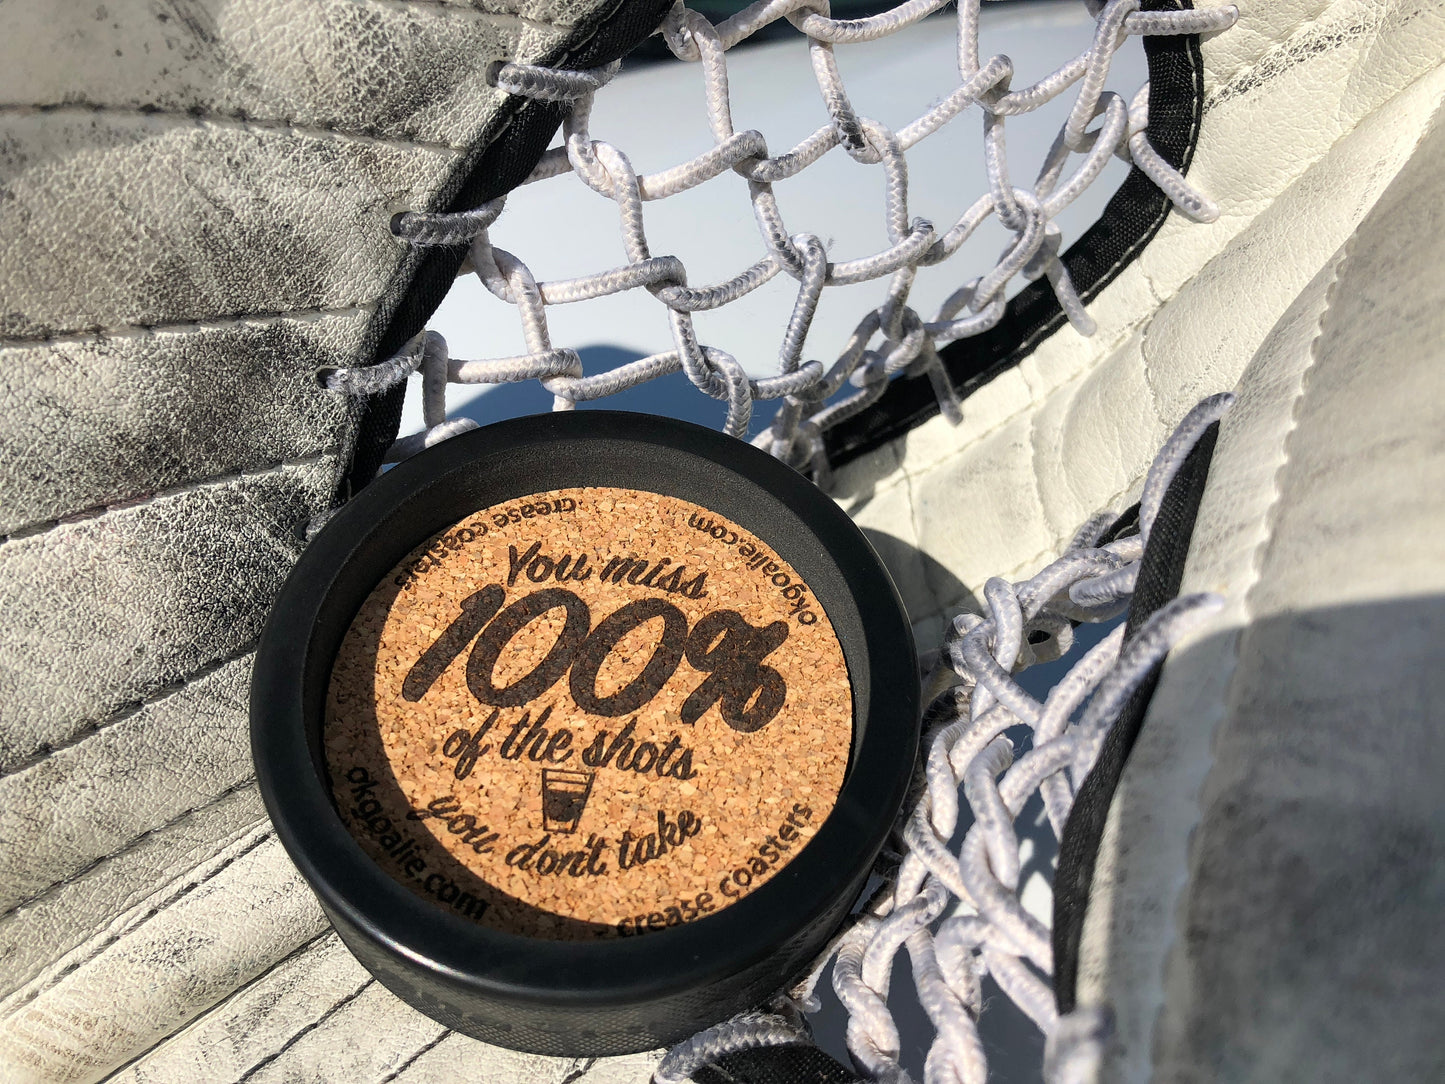 Crease Coaster Quoters- You miss 100% of the shots you don't take